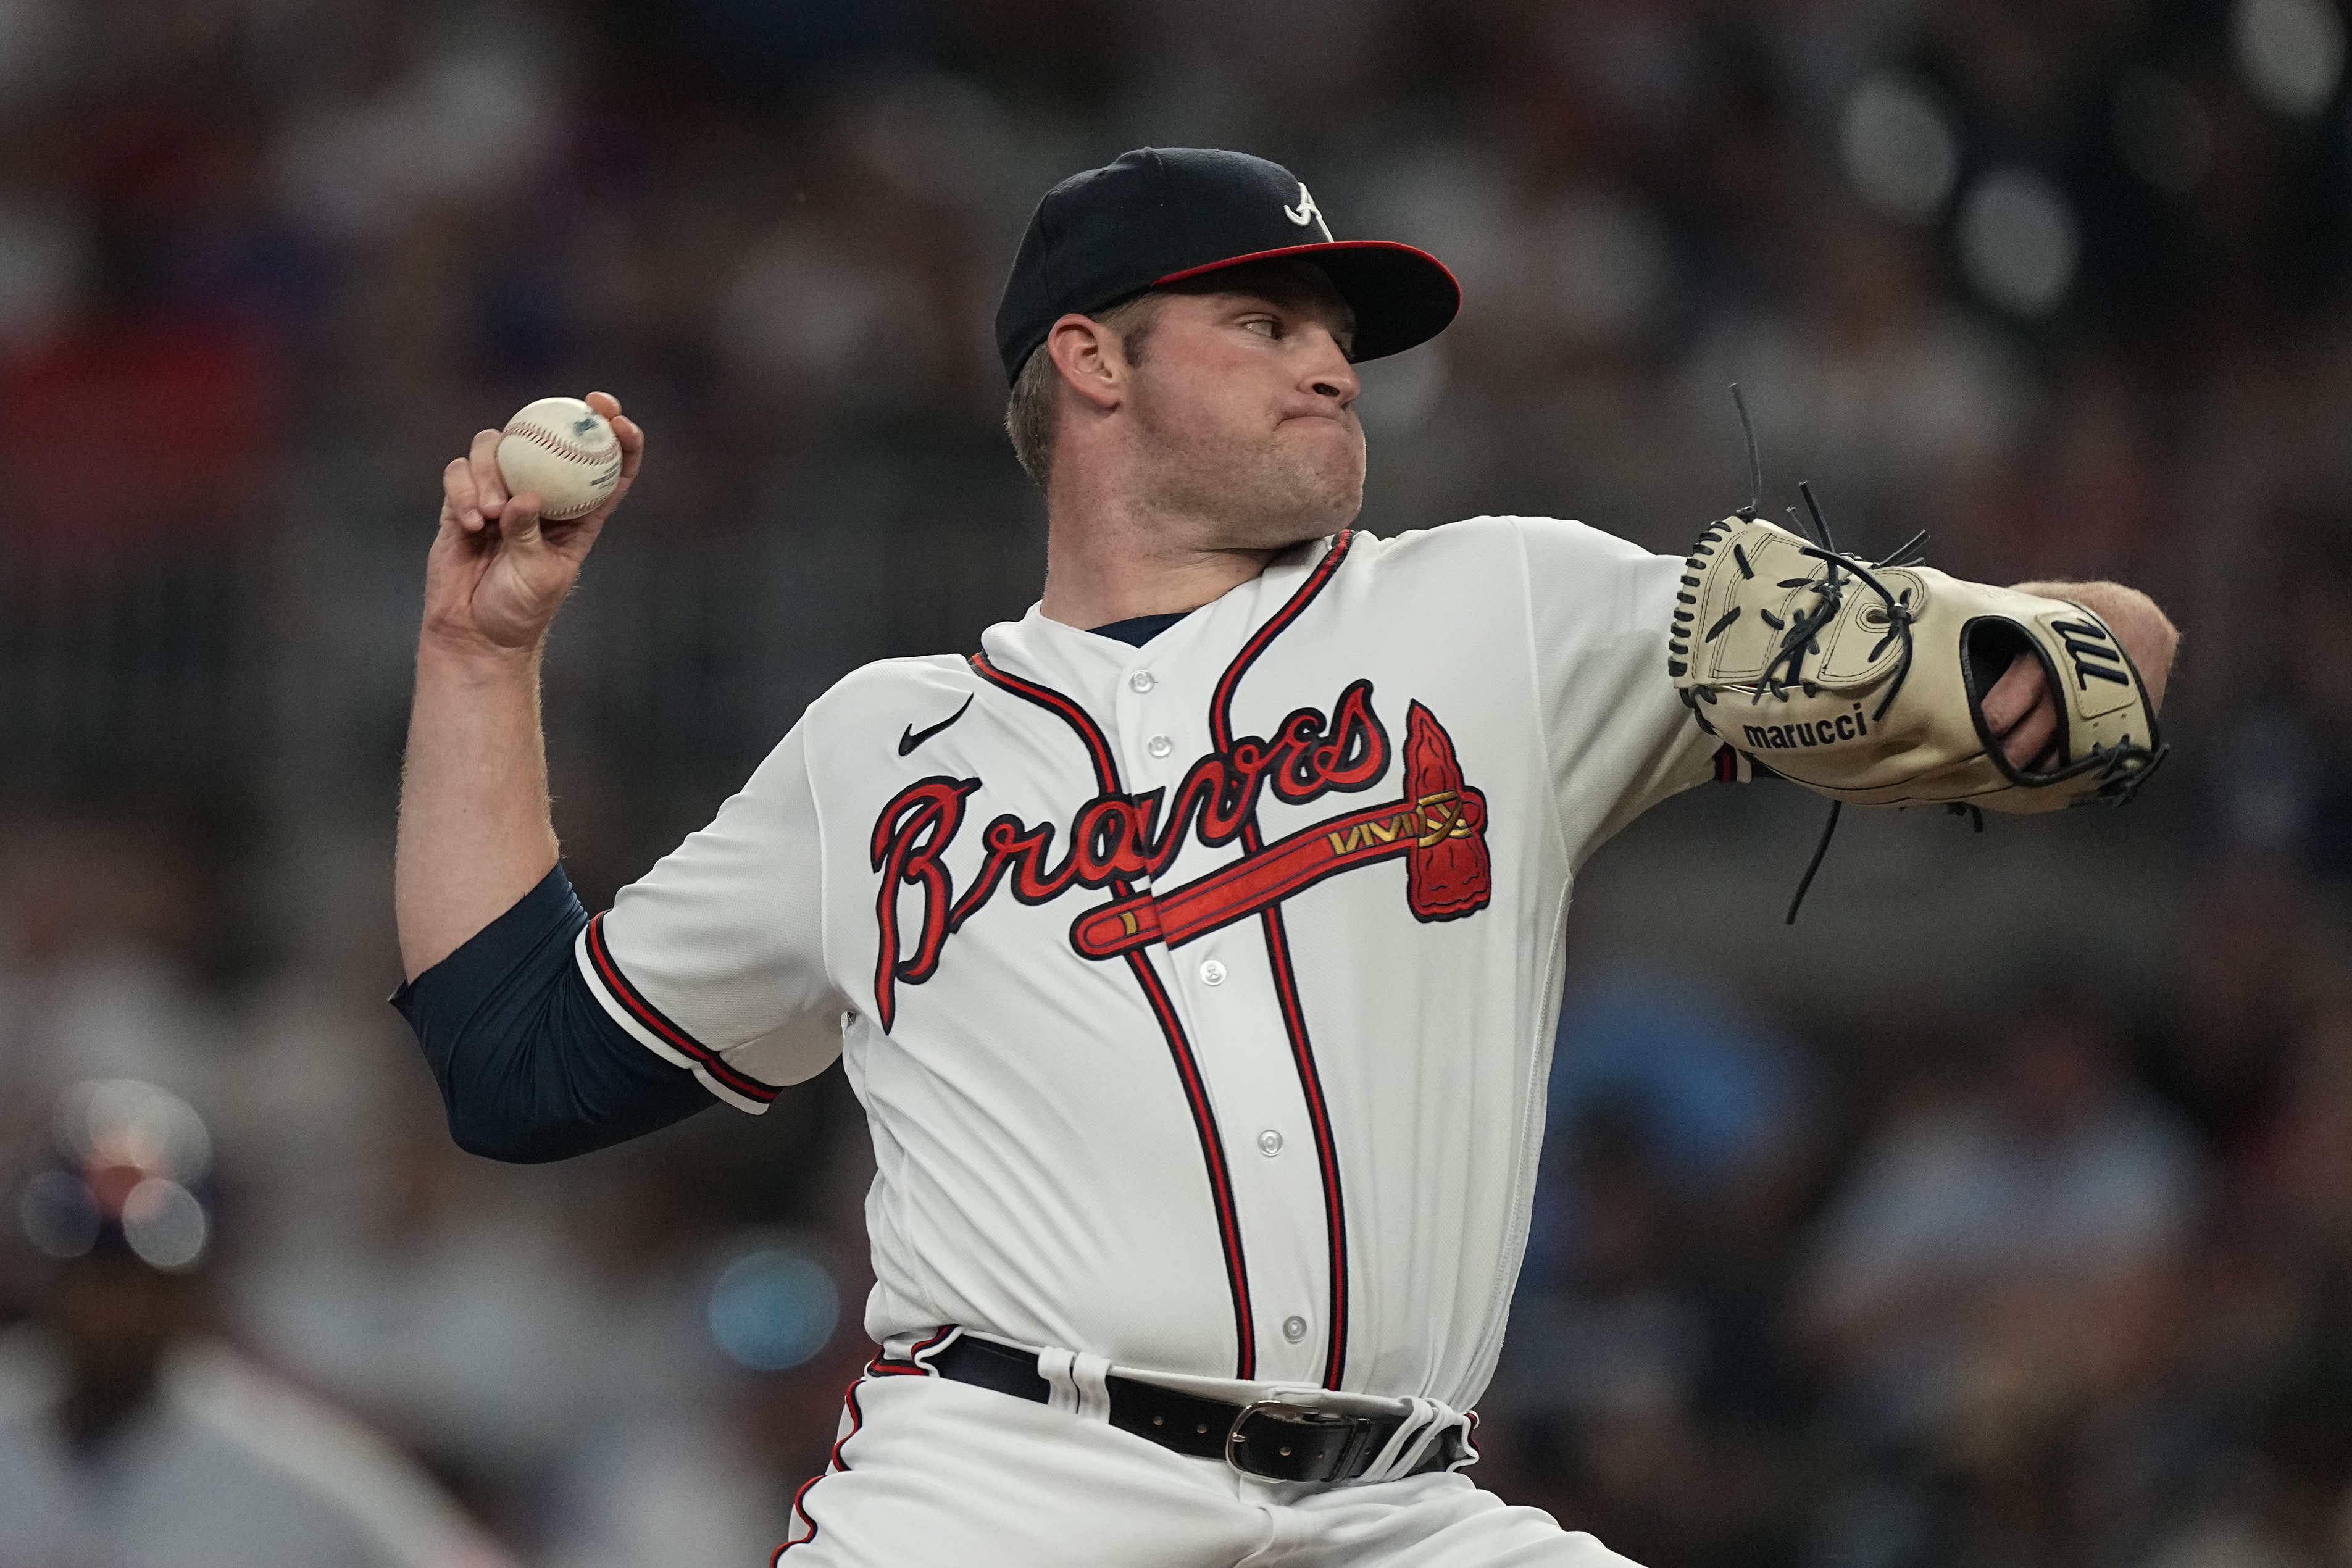 Bryce Elder impressive after rough inning, Marcell Ozuna helps Braves rally  to beat Mets - The Athletic